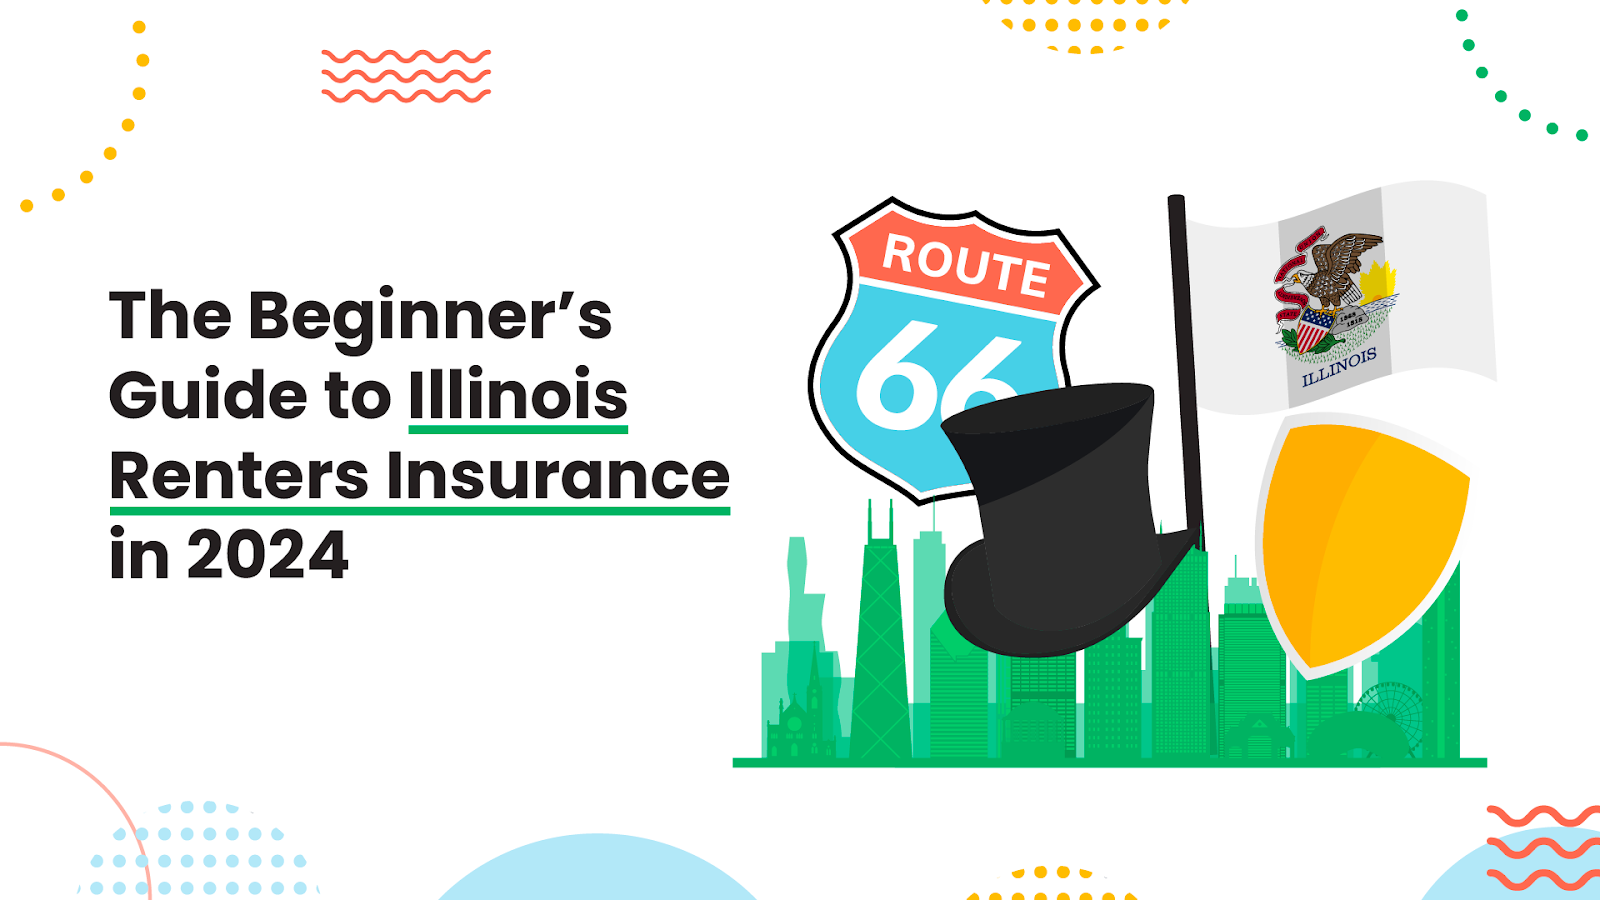 The Beginner’s Guide to Illinois Renters Insurance in 2024